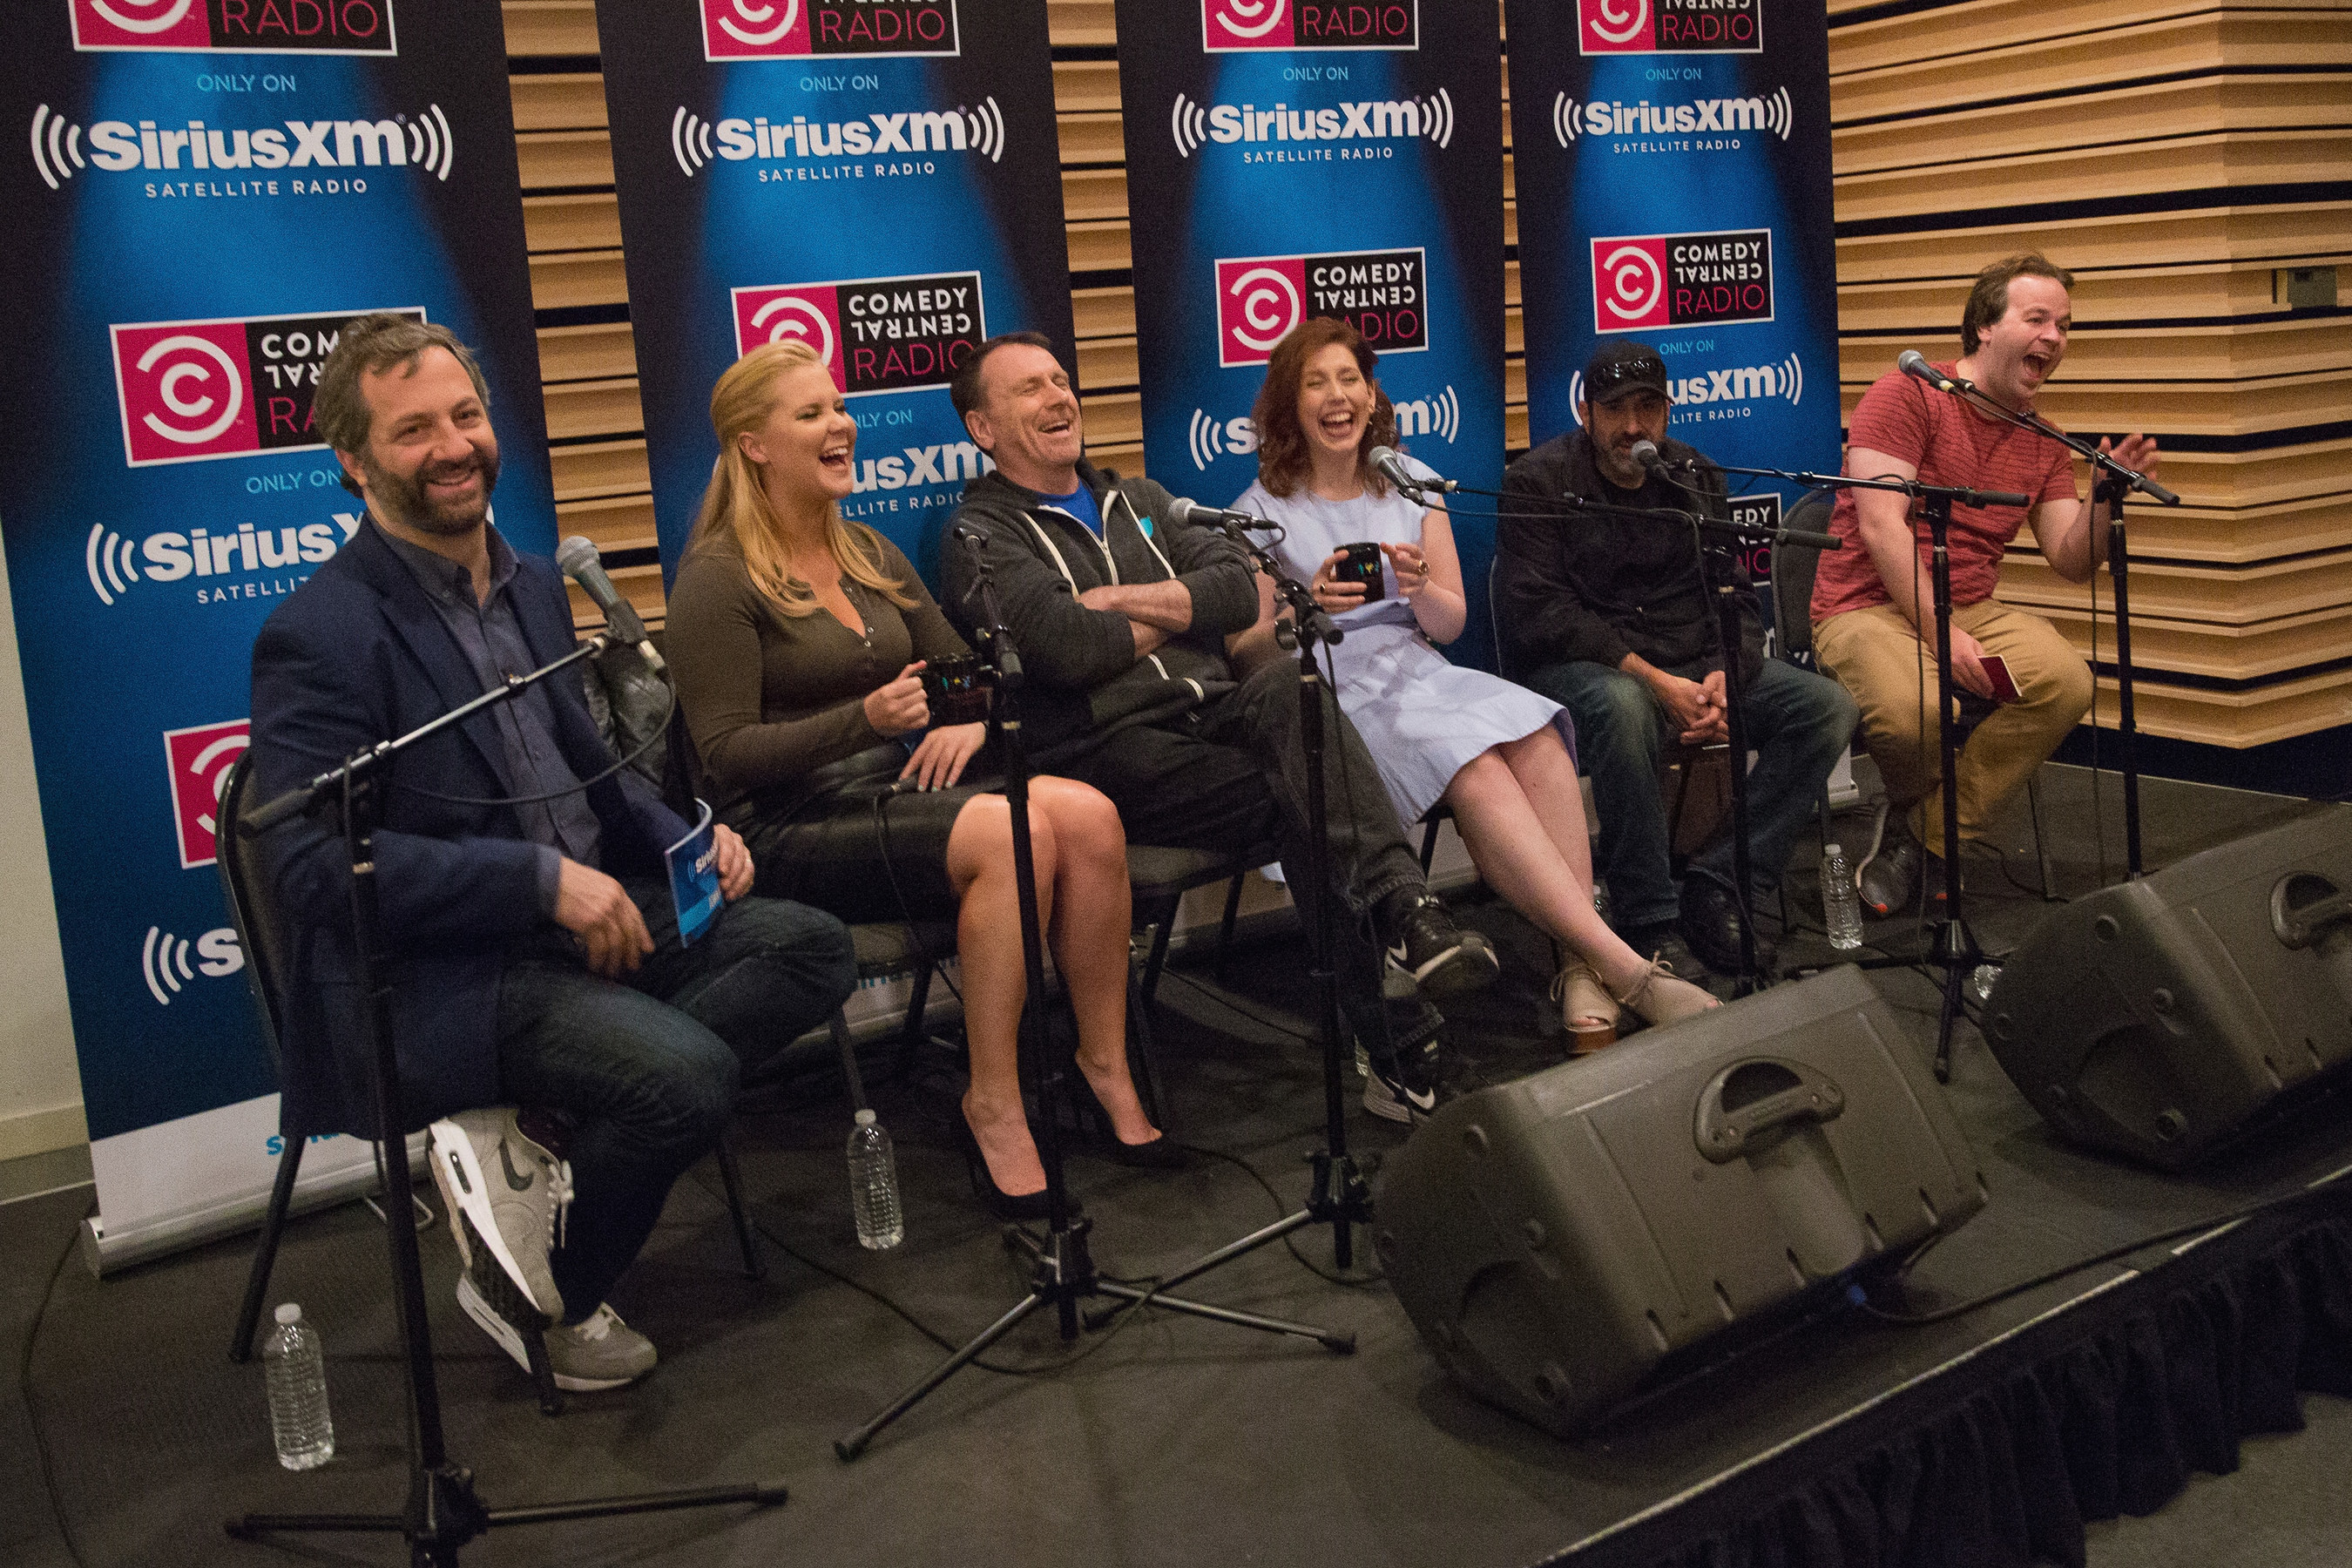 SiriusXM 'Town Hall' with Amy Schumer, Colin Quinn, Vanessa Bayer, Mike Birbiglia and Dave Attell hosted by Judd Apatow on SiriusXM's Comedy Central Radio